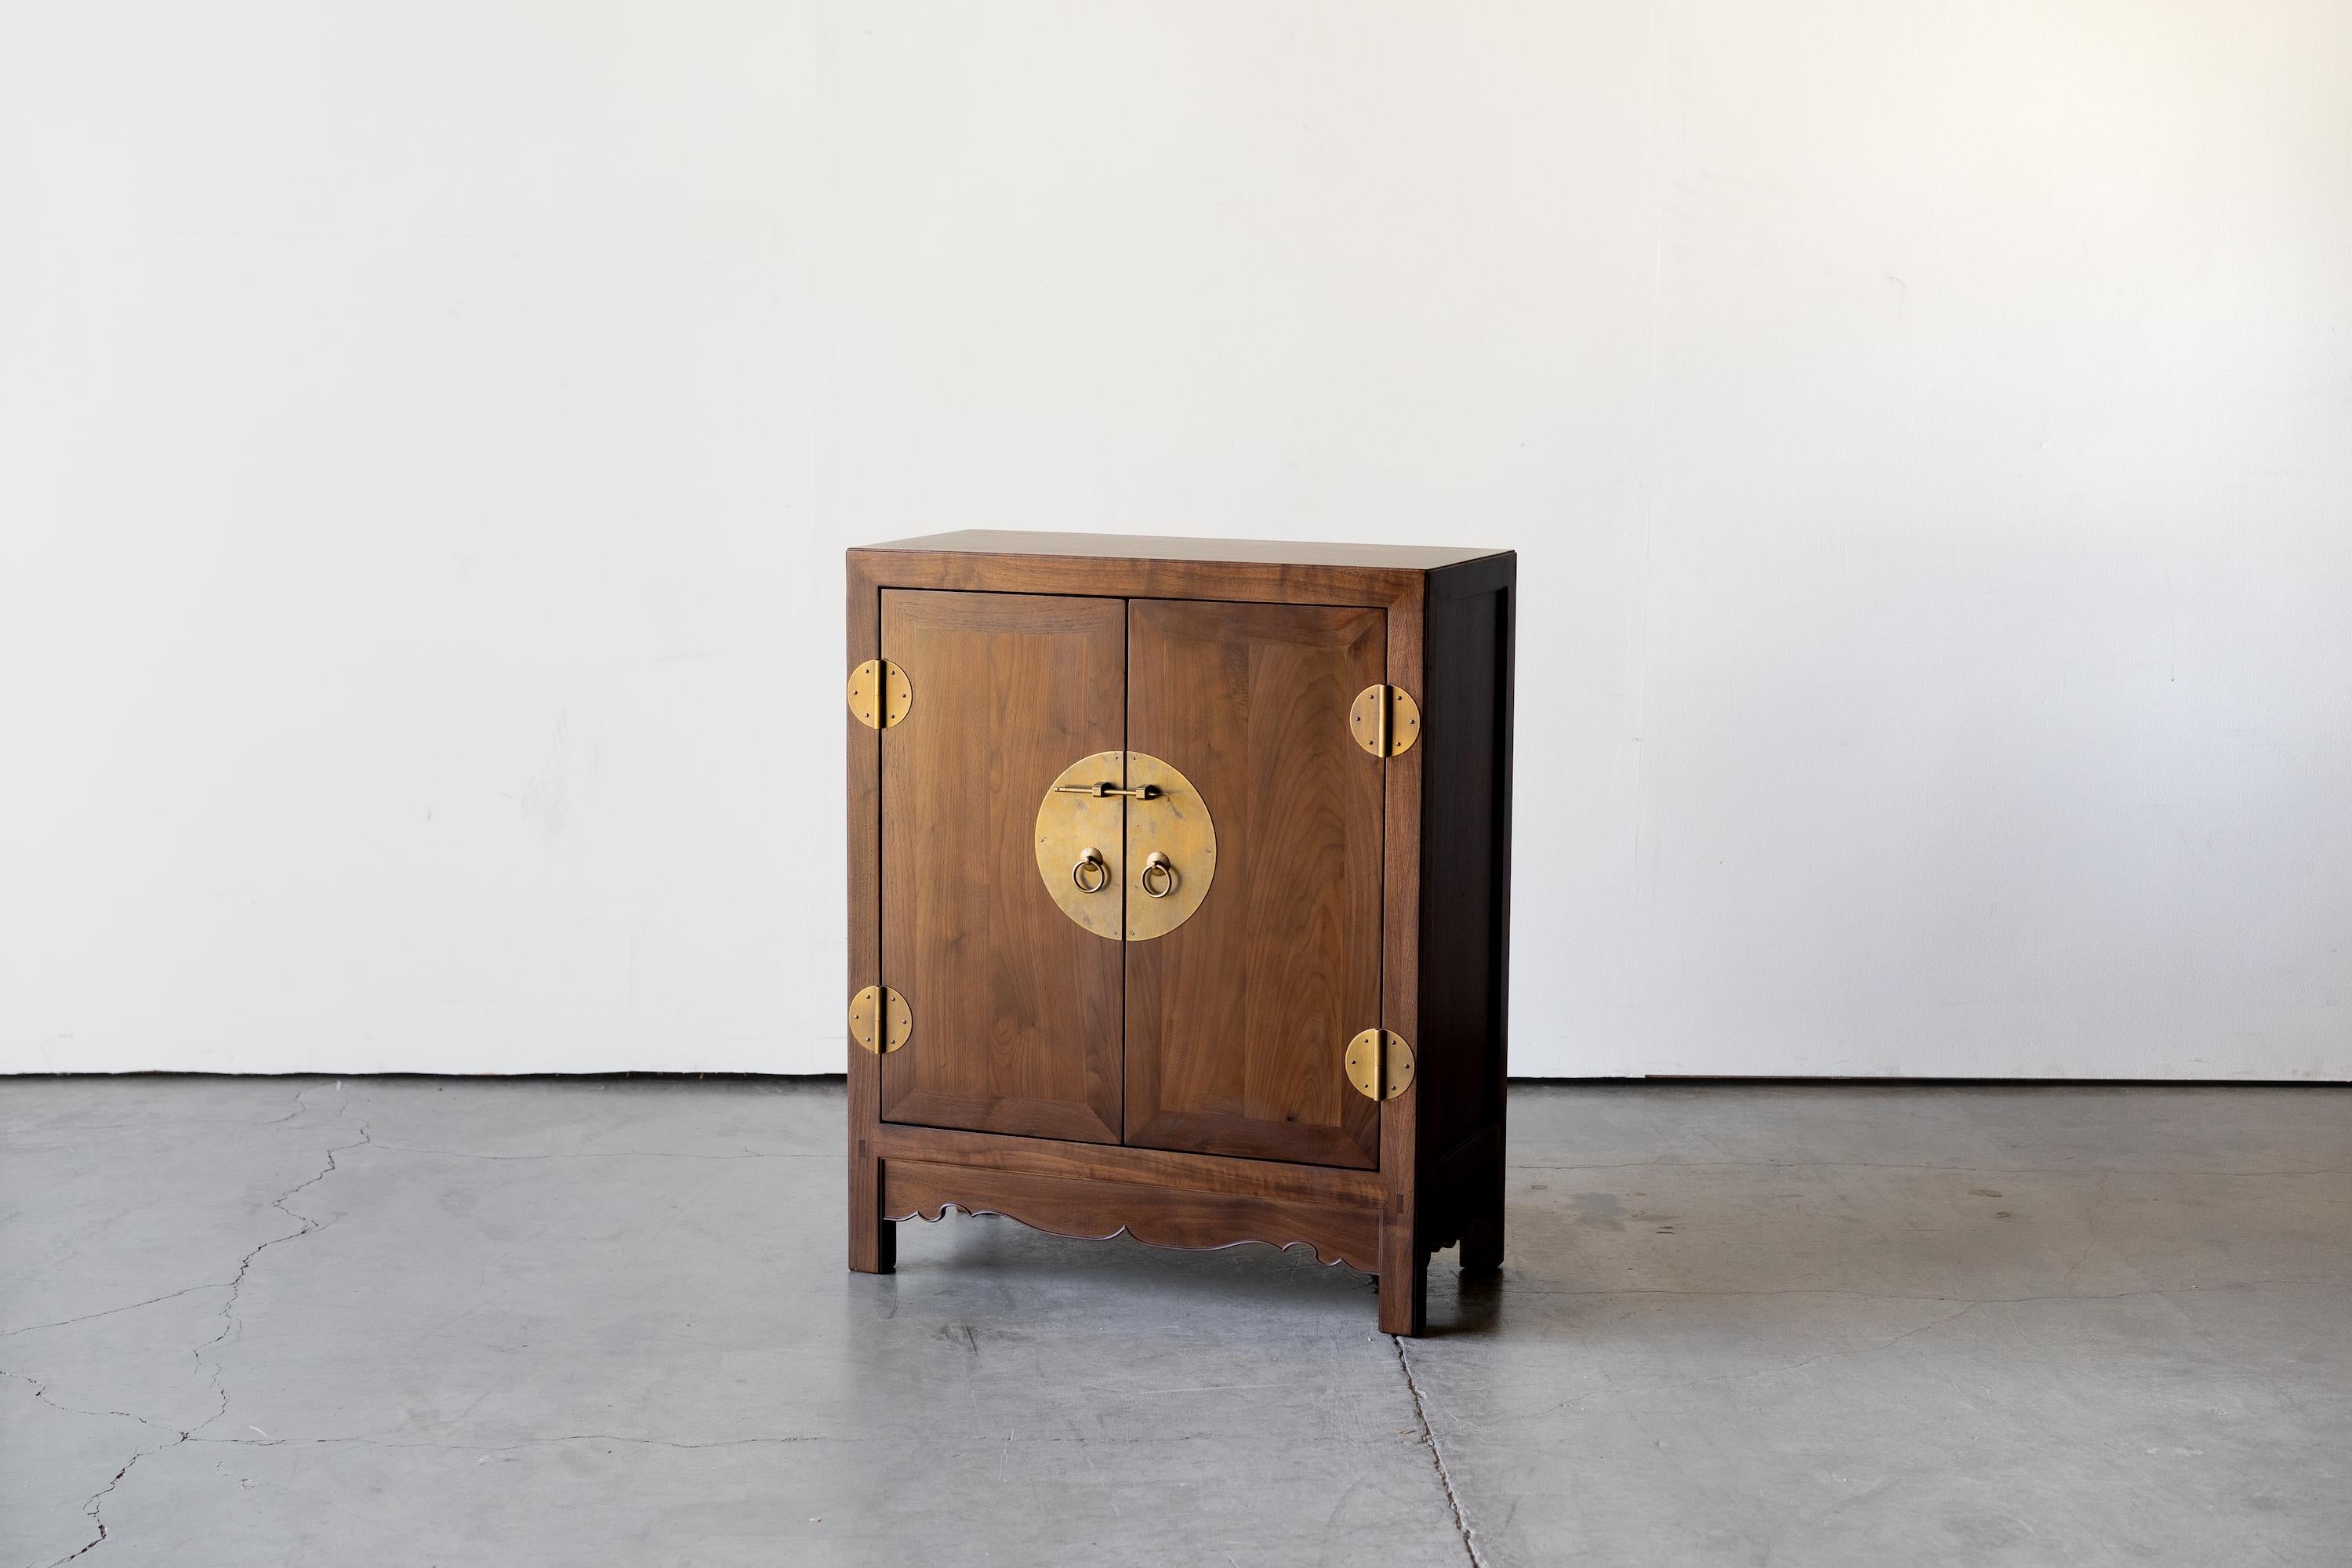 Part of the Sun at Six 5th anniversary special collection, celebrating their history and the first Ming dynasty era pieces that Antares’s mom worked on over 30 years ago when she learned furniture.

Ming era cabinets are divided into round-corner